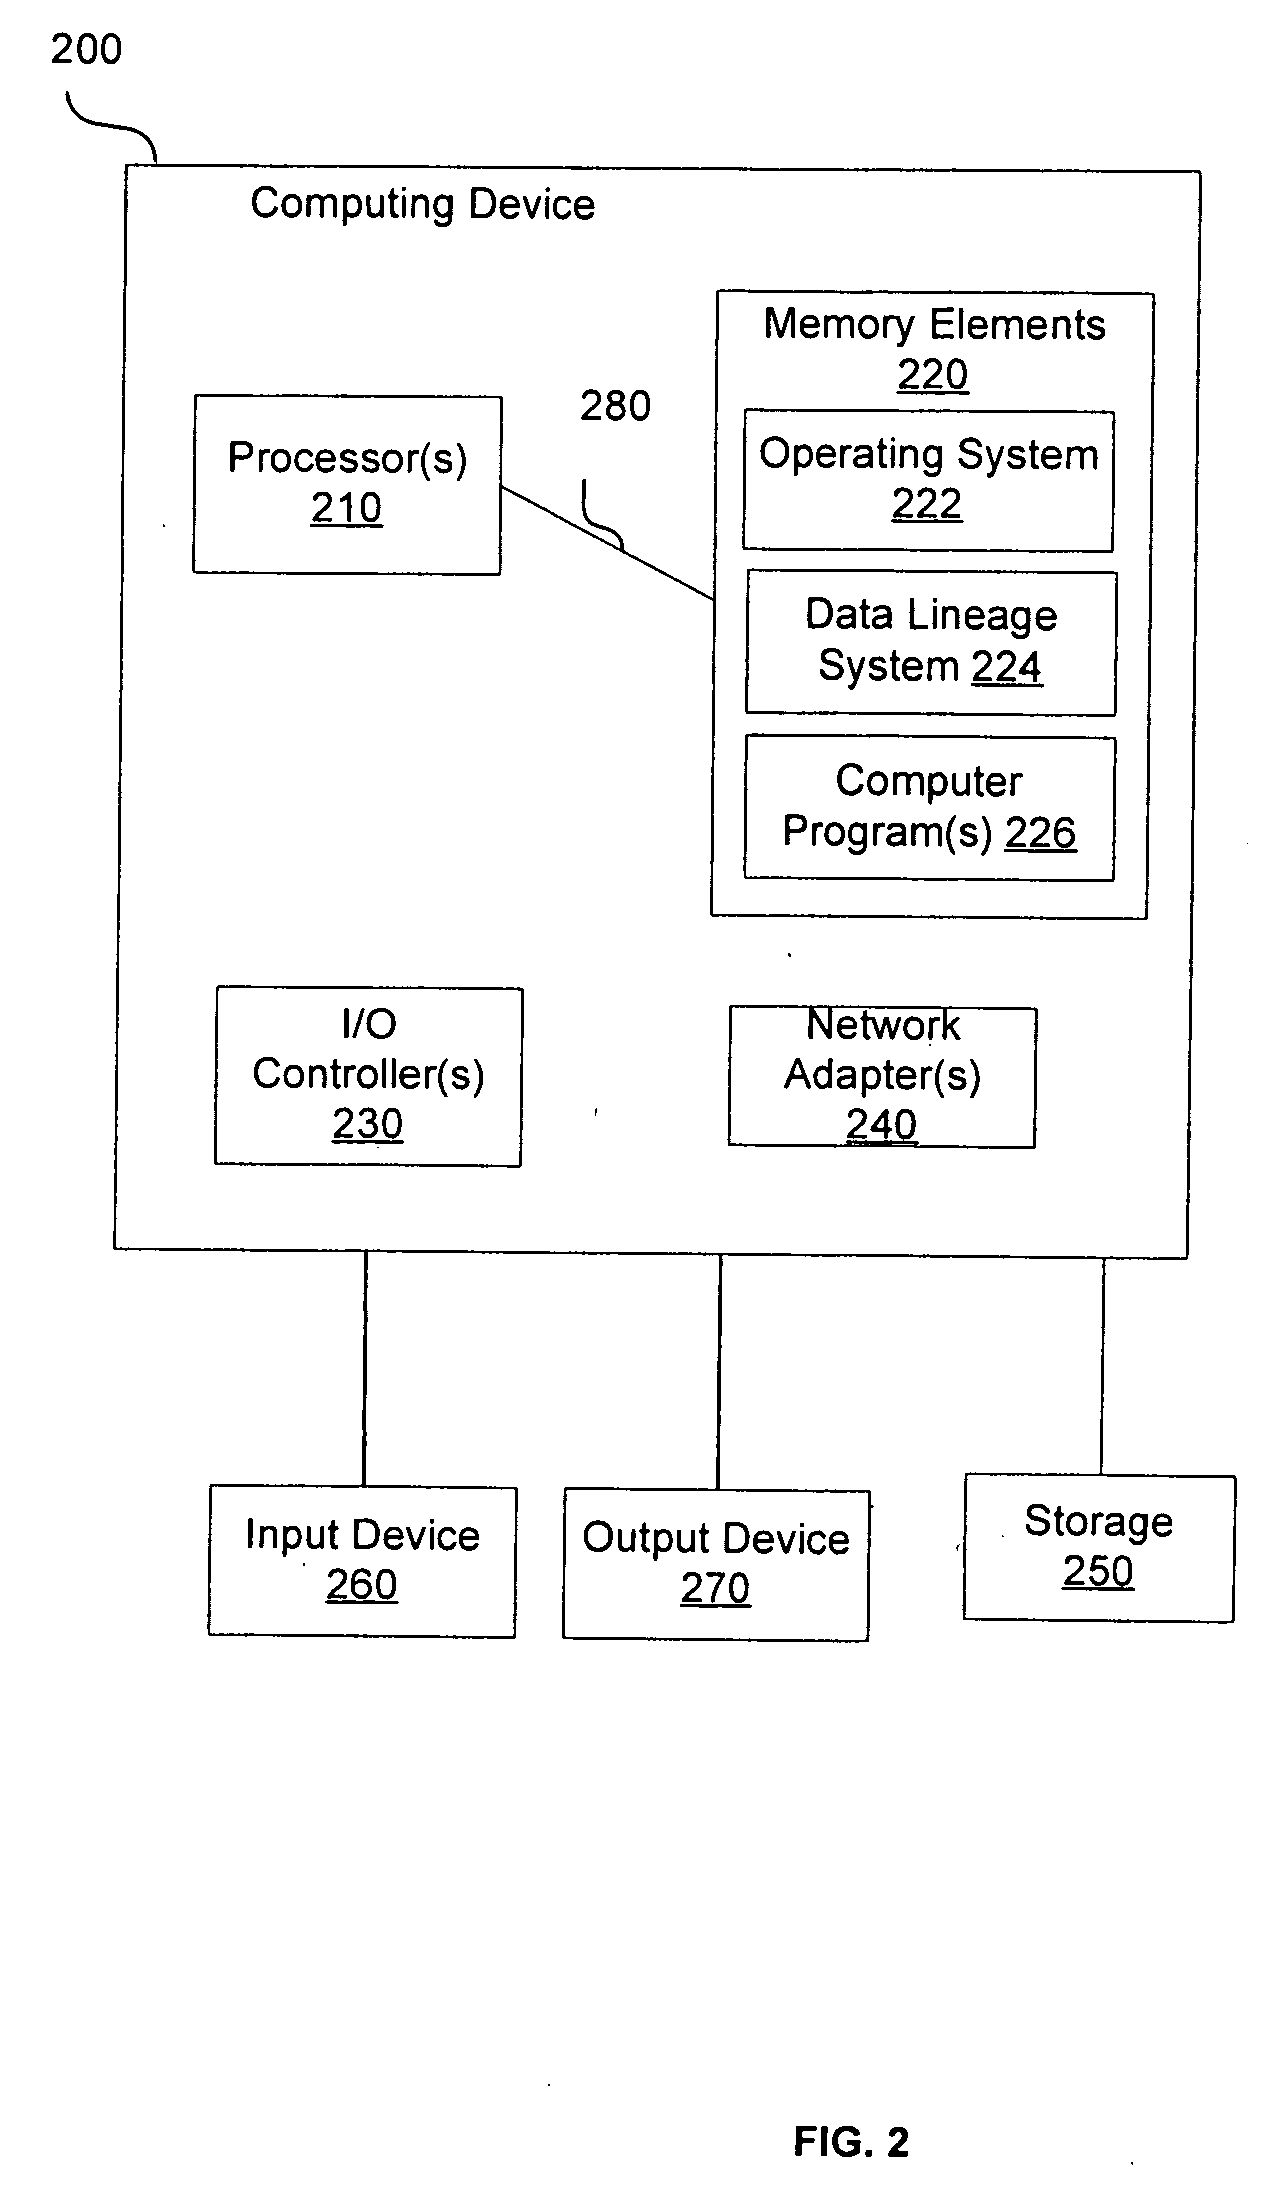 User interface options of a data lineage tool